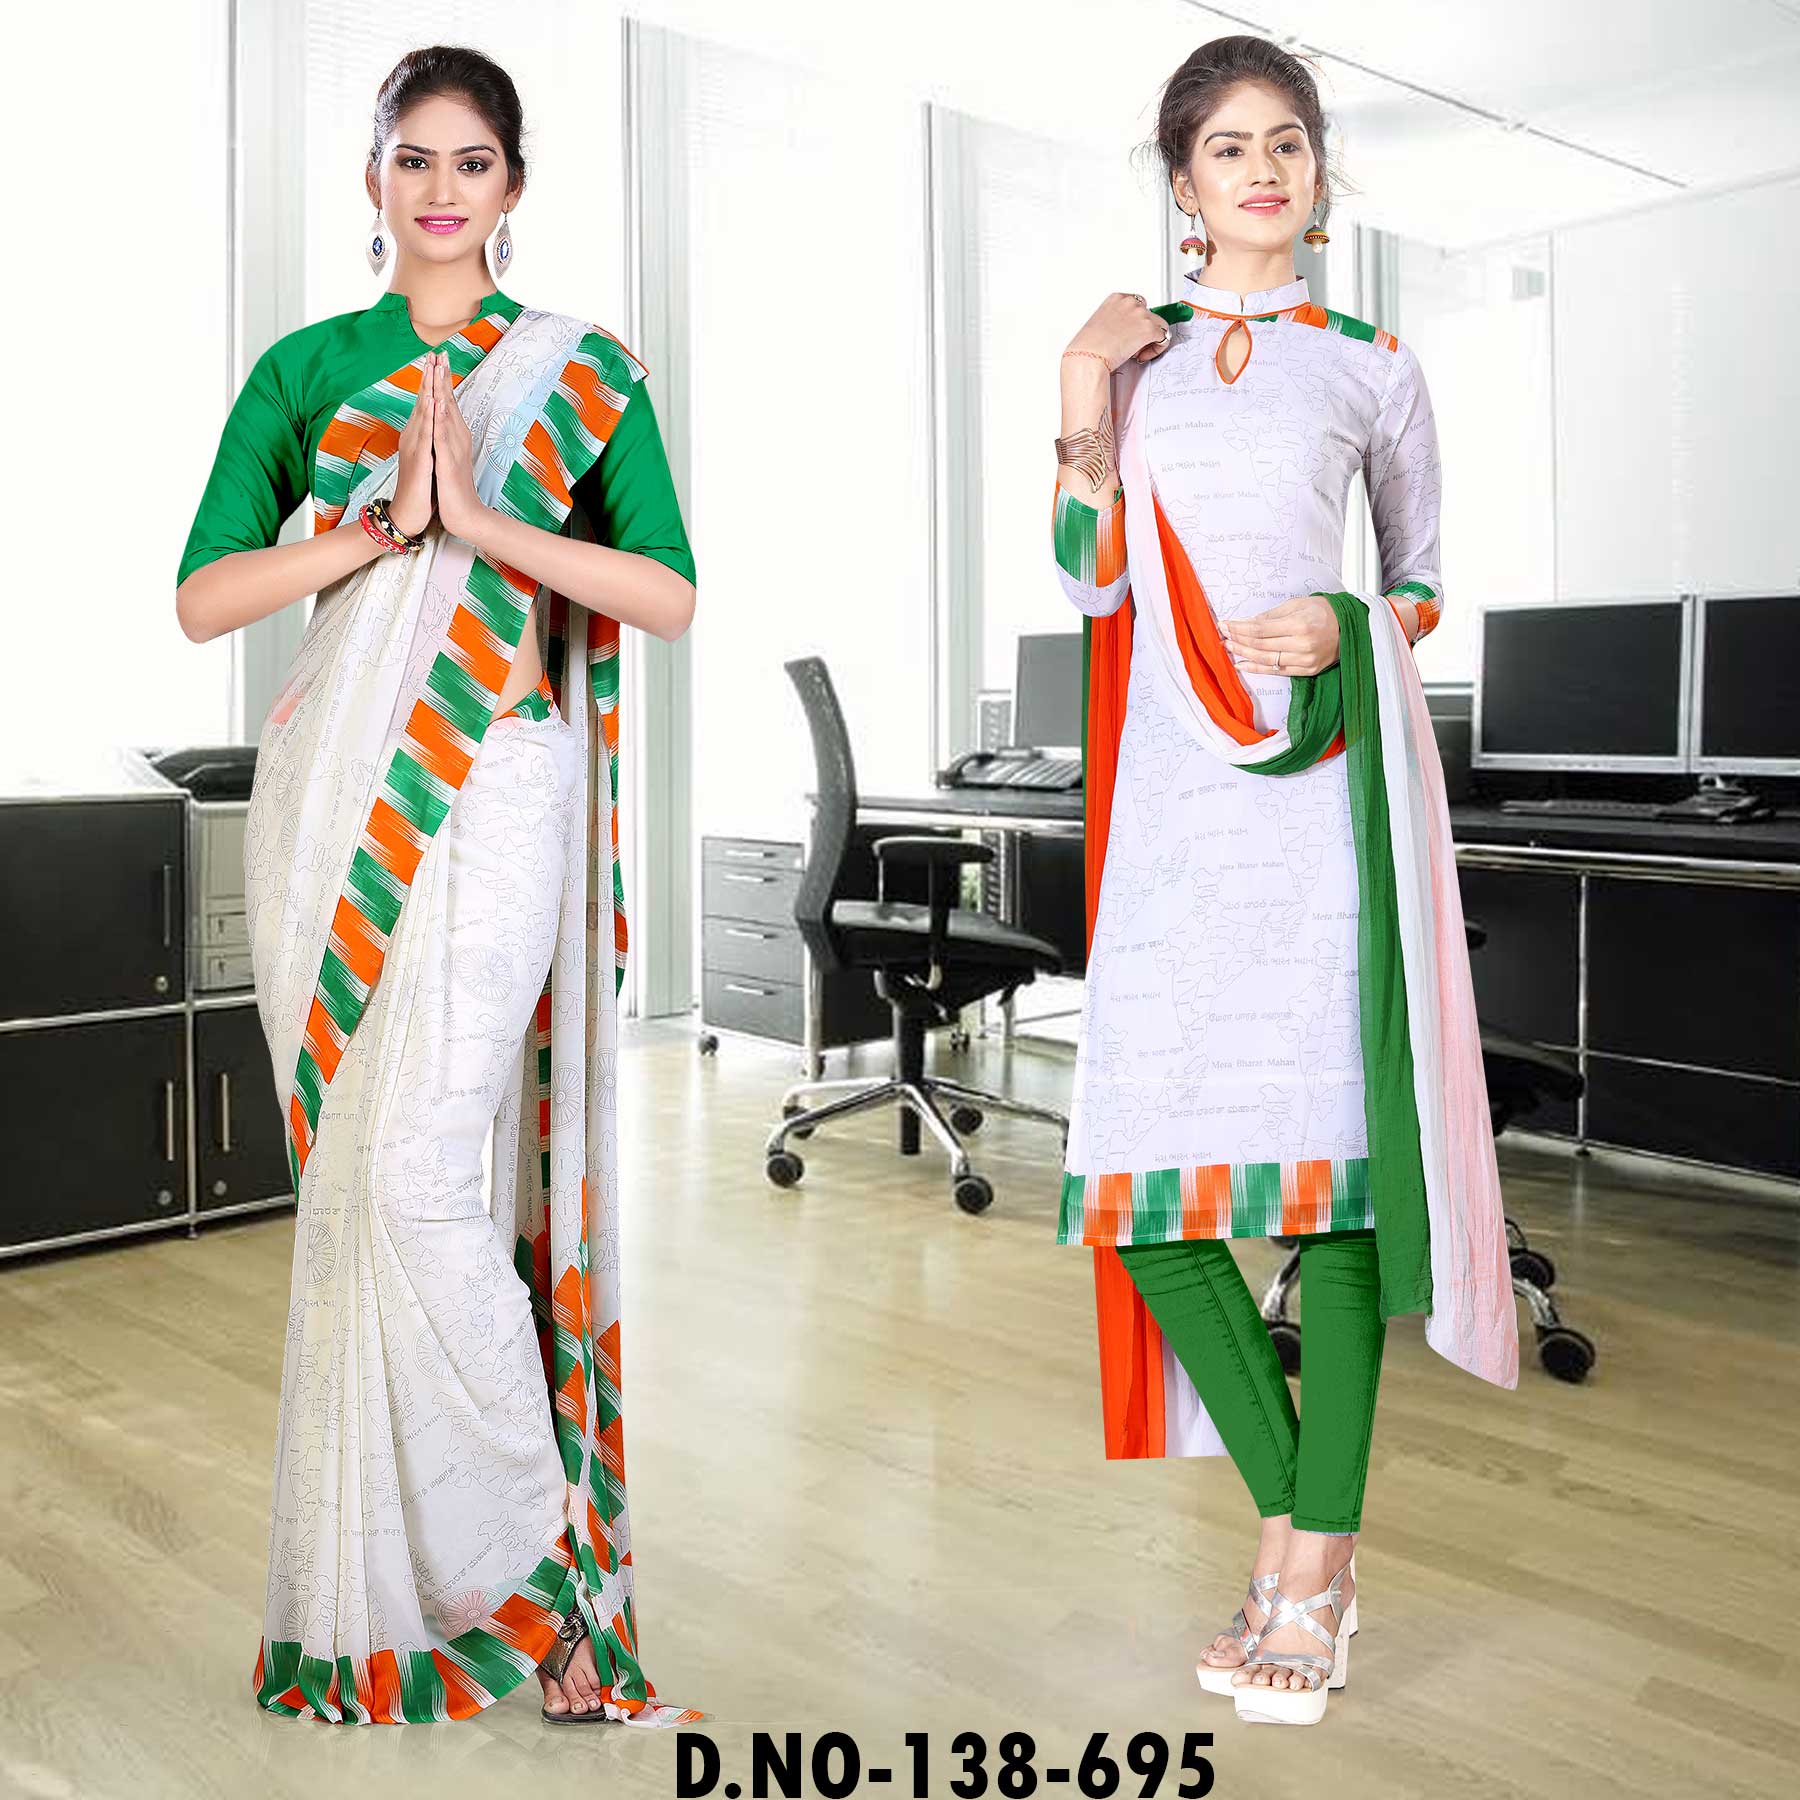 Independence Day Limited Edition Uniform Sarees BOXPACK